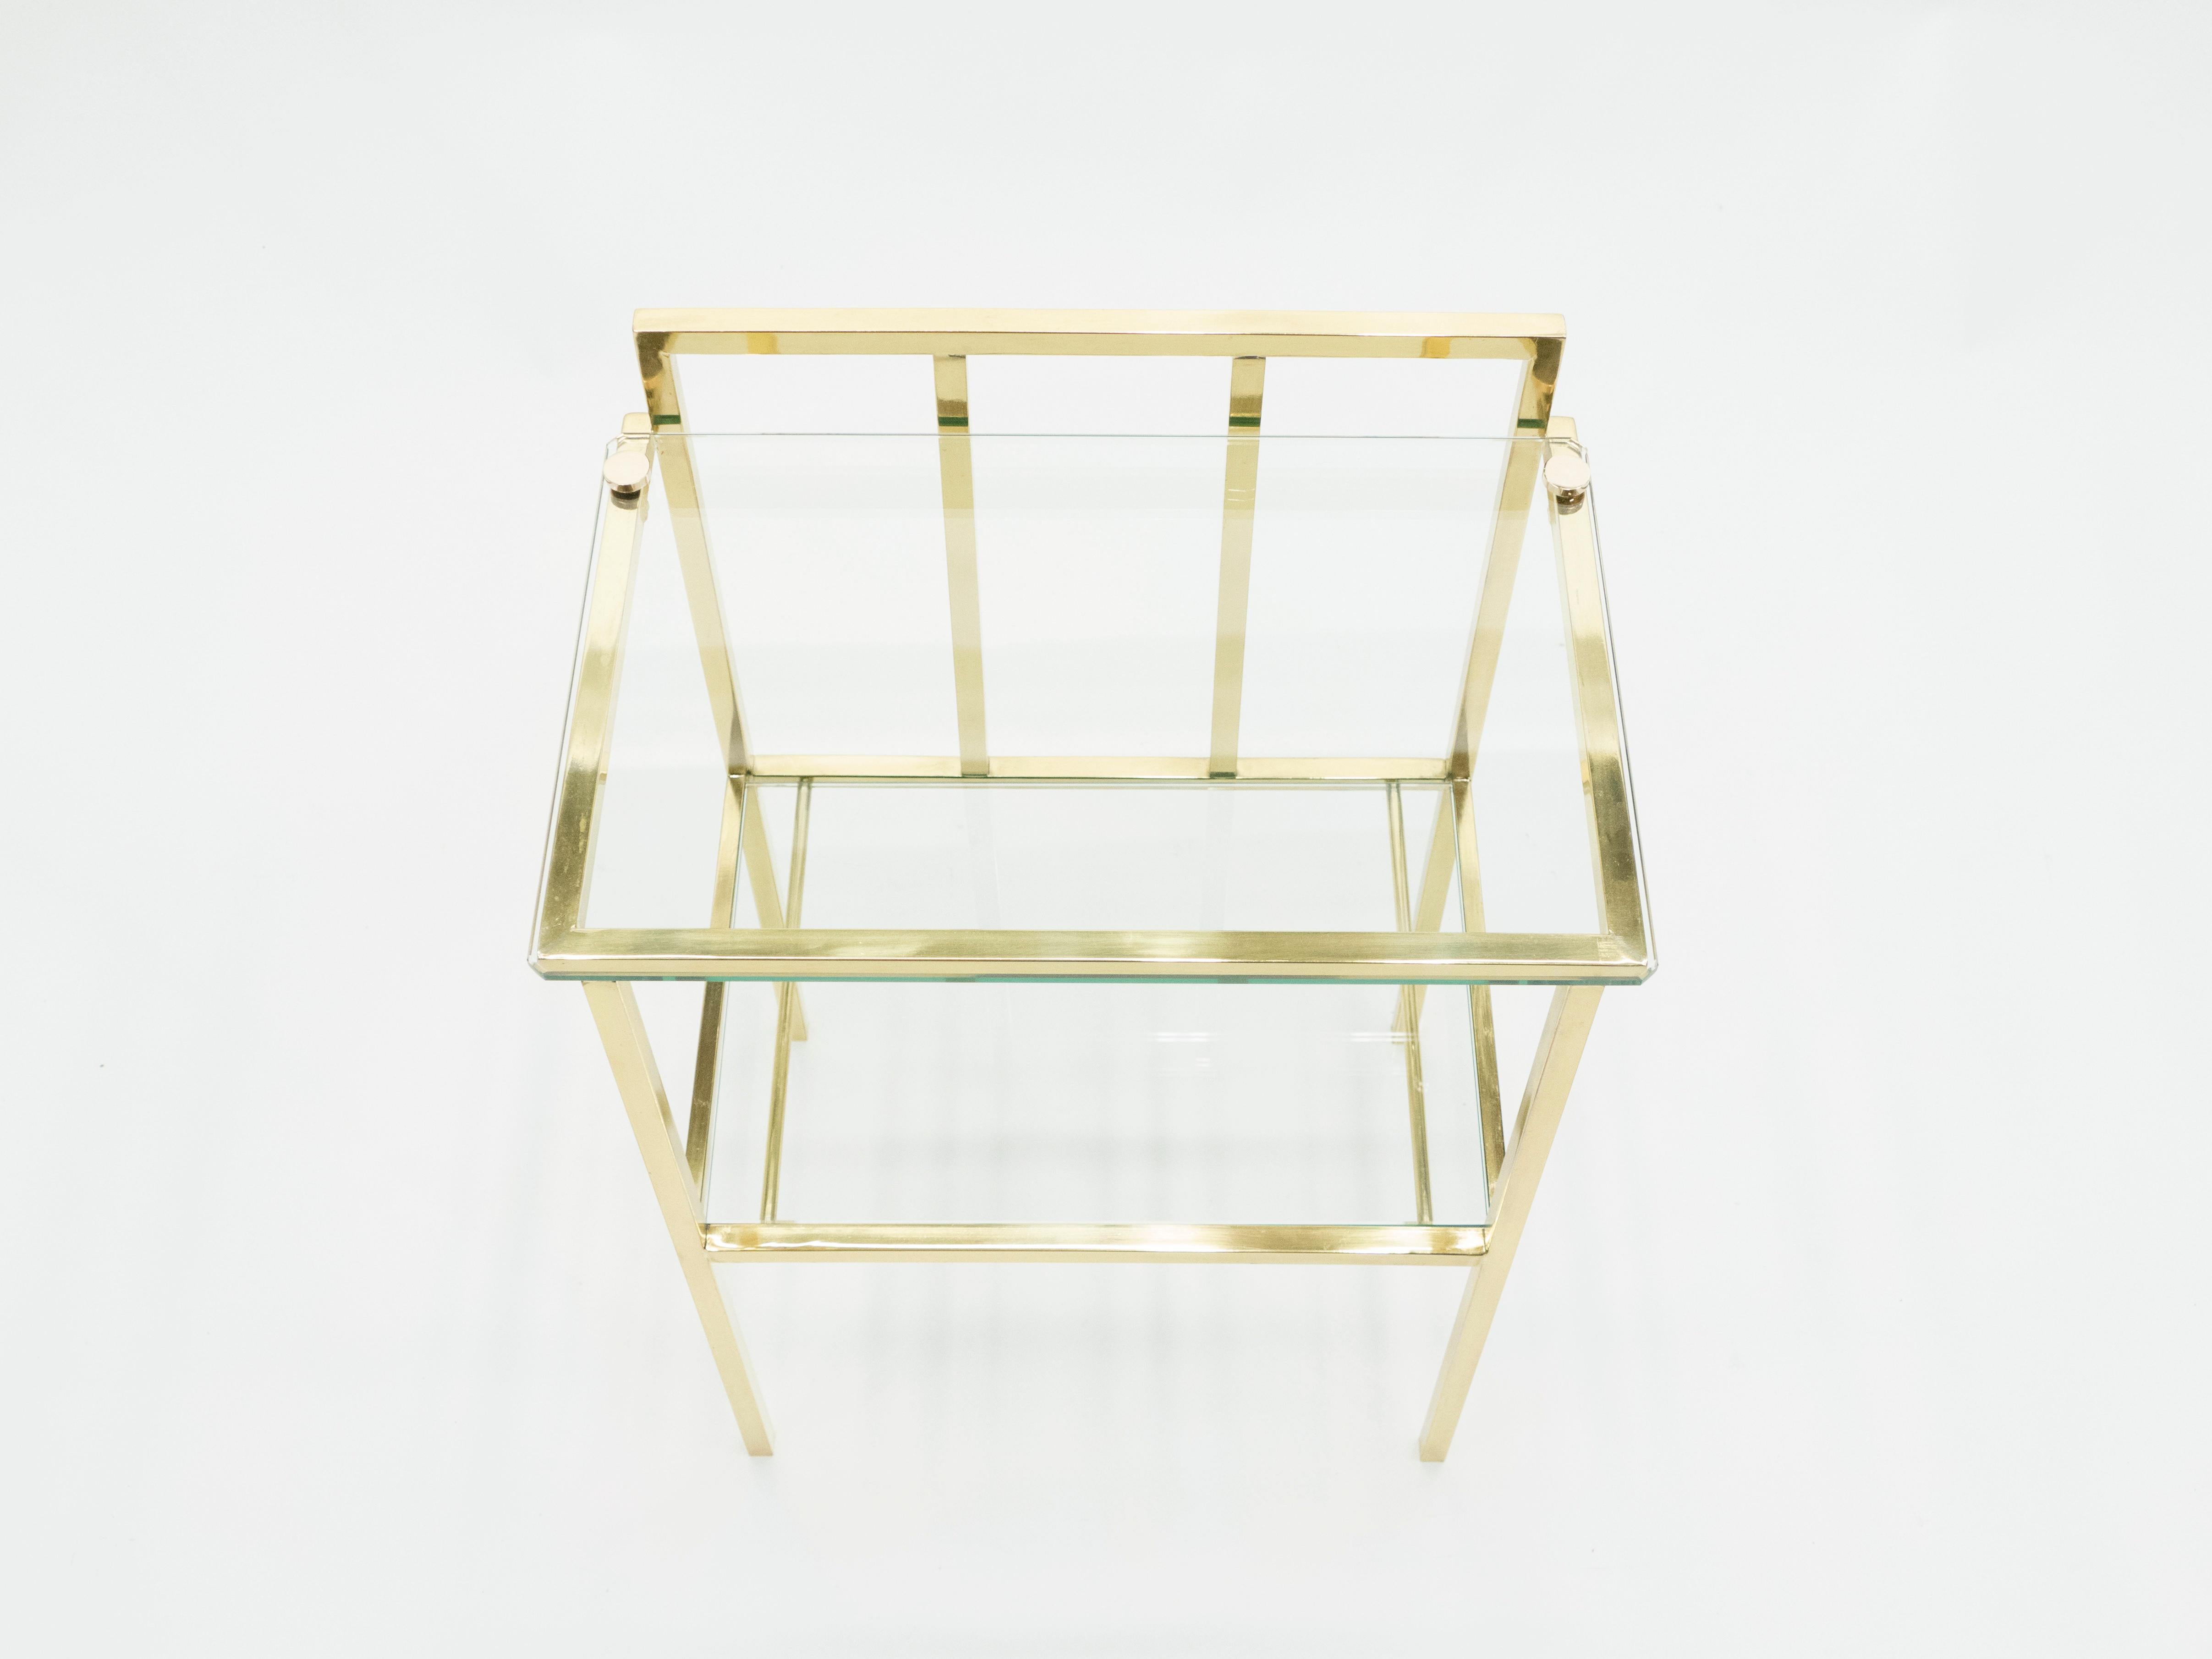 French Brass Two-Tier Glass End Tables Attributed to Marc du Plantier, 1960s For Sale 2